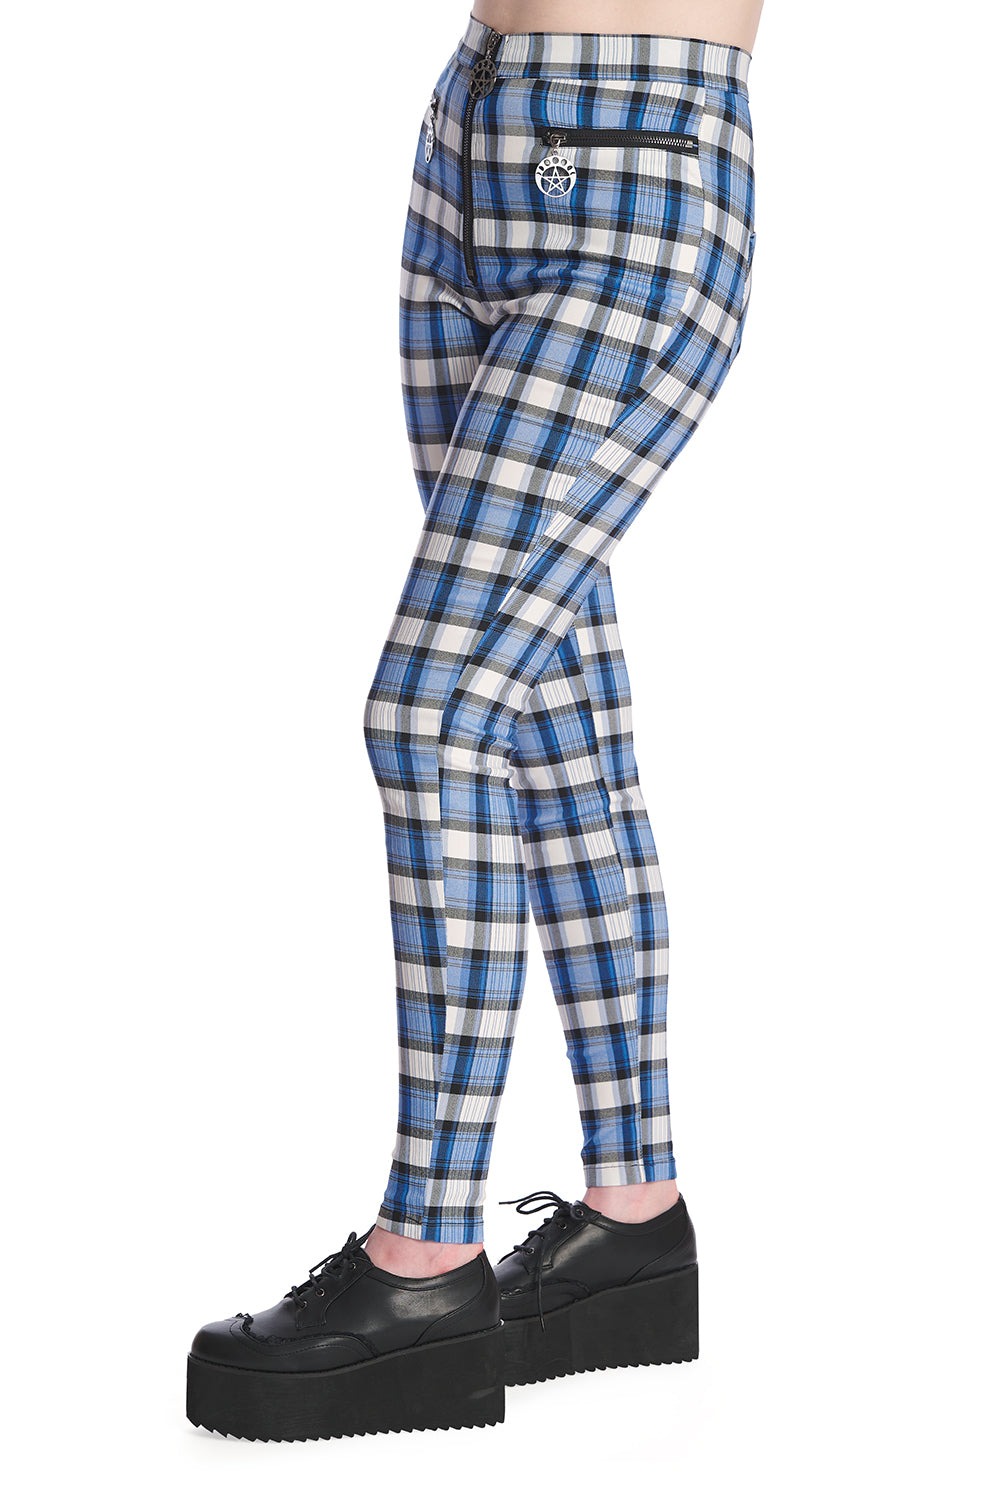  High waisted check skinny legged trousers in blue